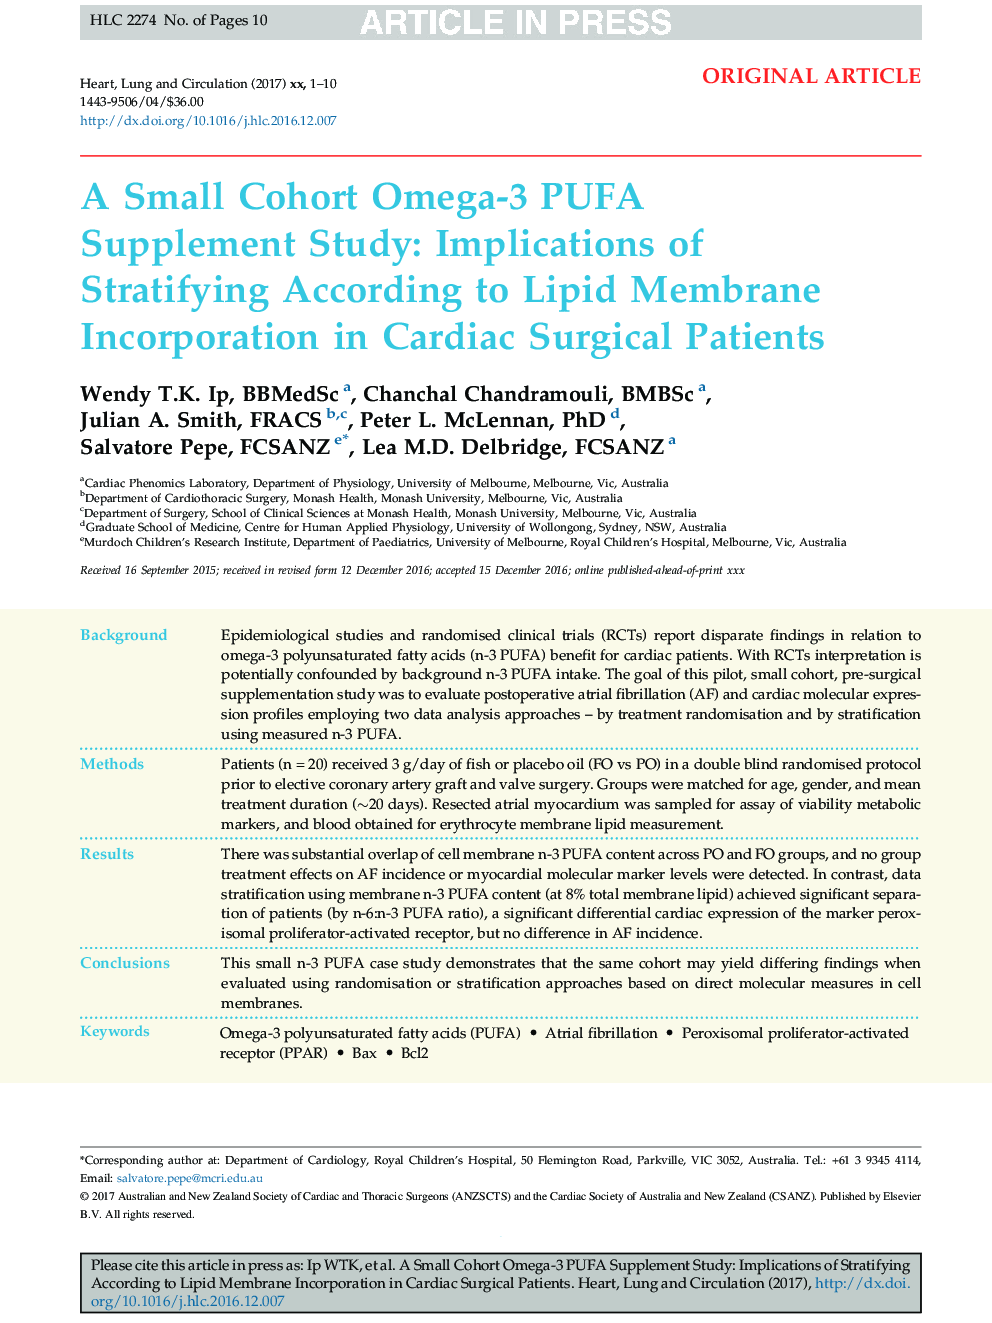 A Small Cohort Omega-3 PUFA Supplement Study: Implications of Stratifying According to Lipid Membrane Incorporation in Cardiac Surgical Patients